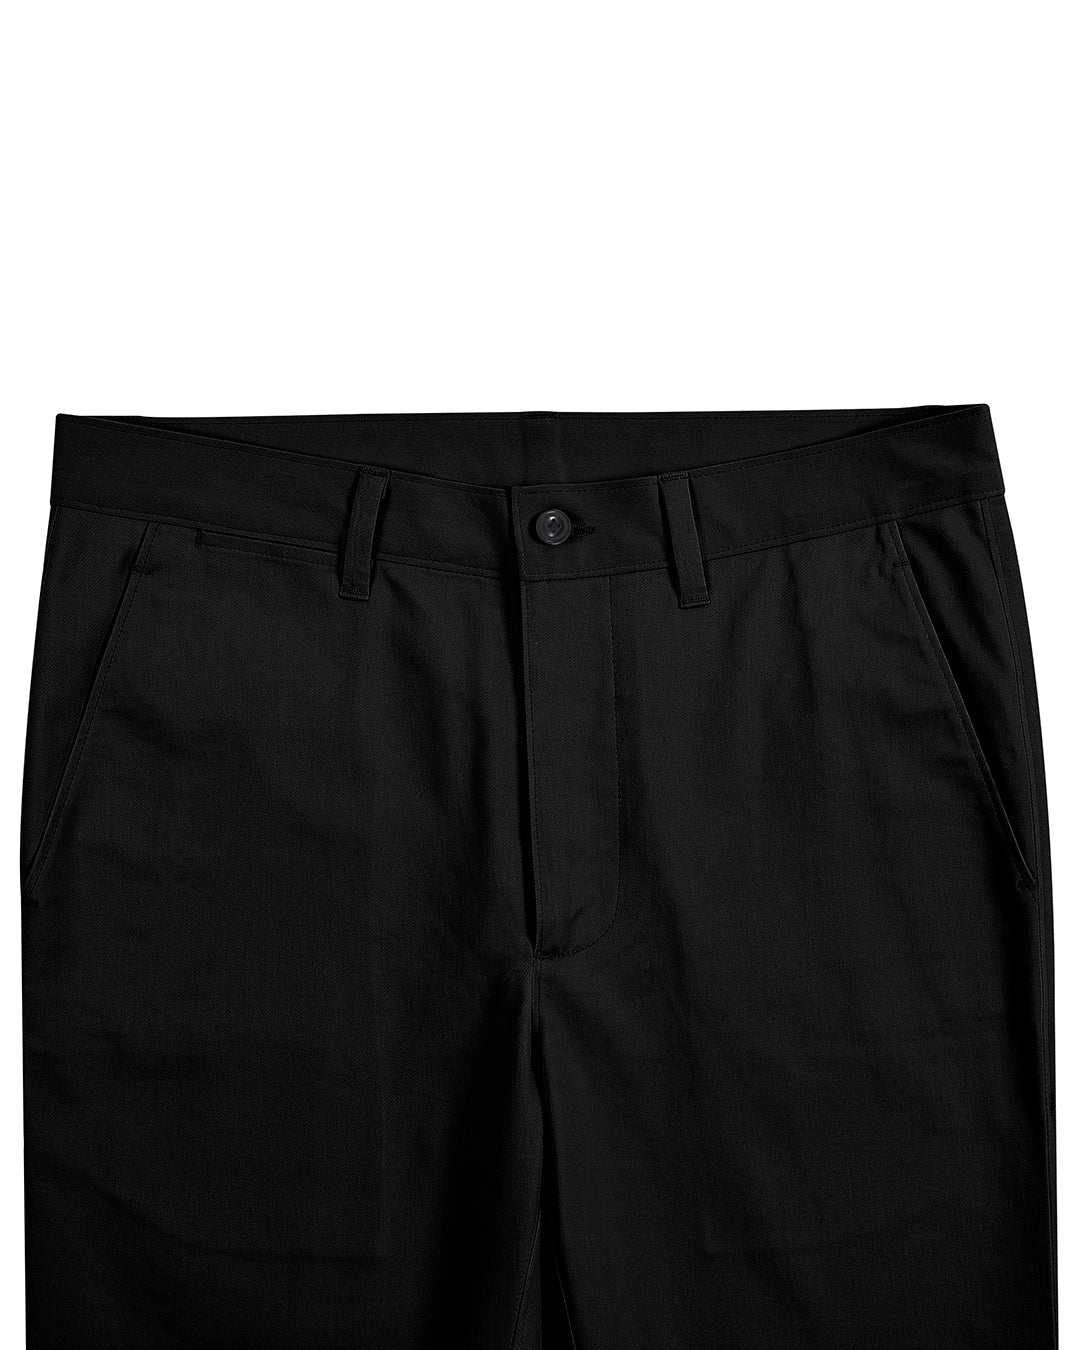 Front view of custom Genoa Chino pants for men by Luxire in black